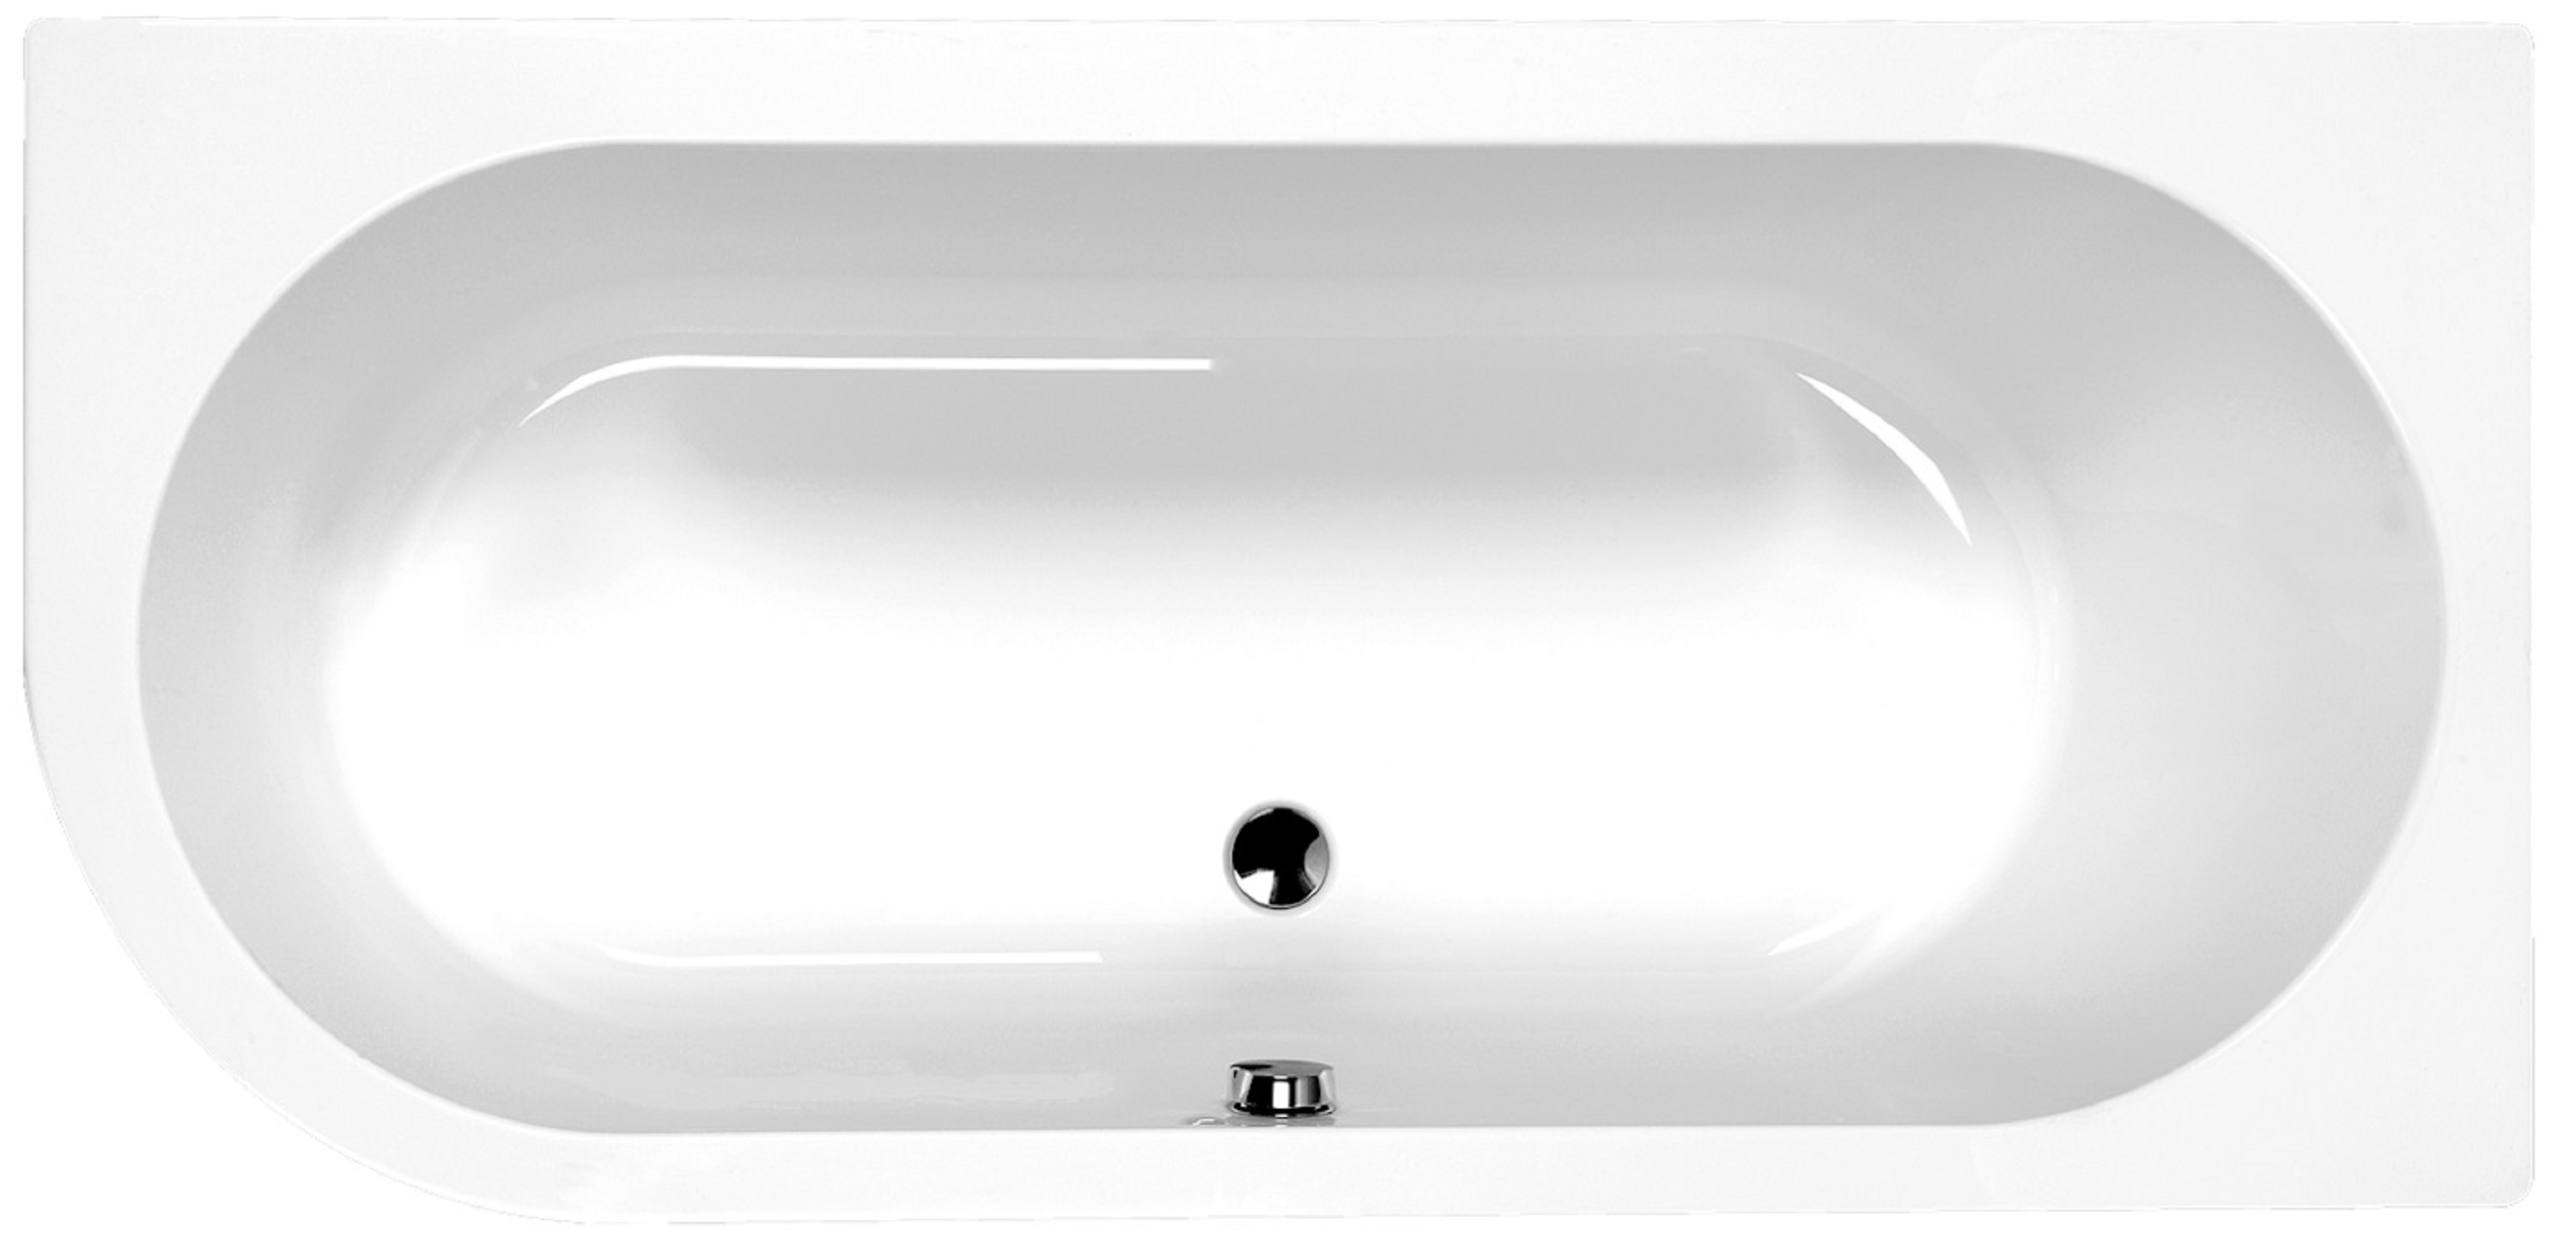 Carron Status Single Ended No Tap Hole Carronite LH/RH Bath with Front Bath Panel - 1700 x 800mm